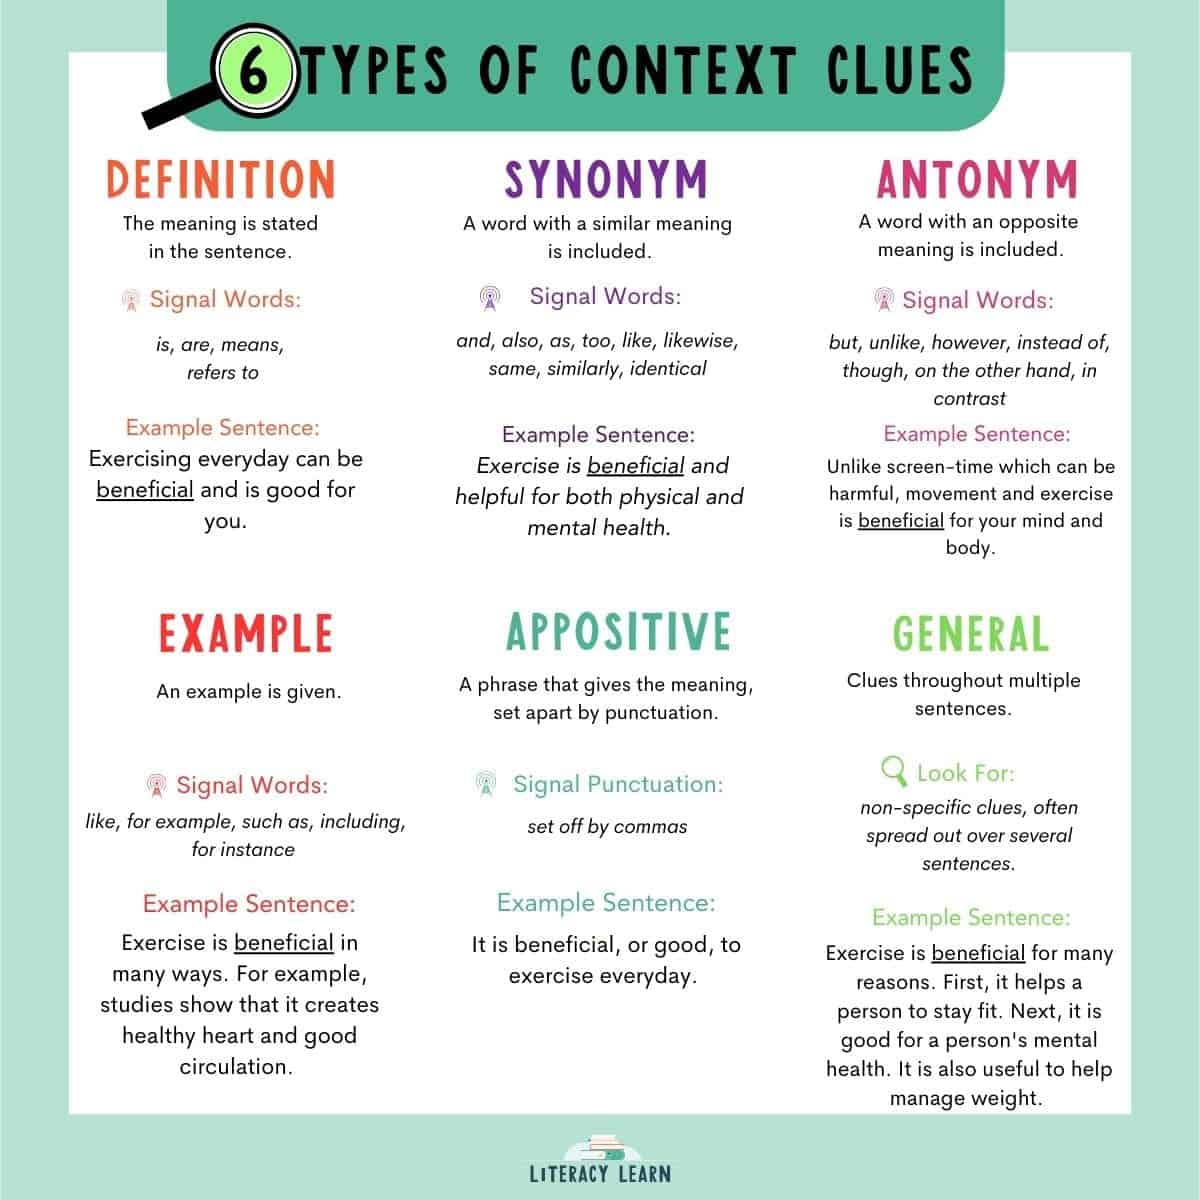 Visual with 6 types of context clues with definitions, signal words, and examples.